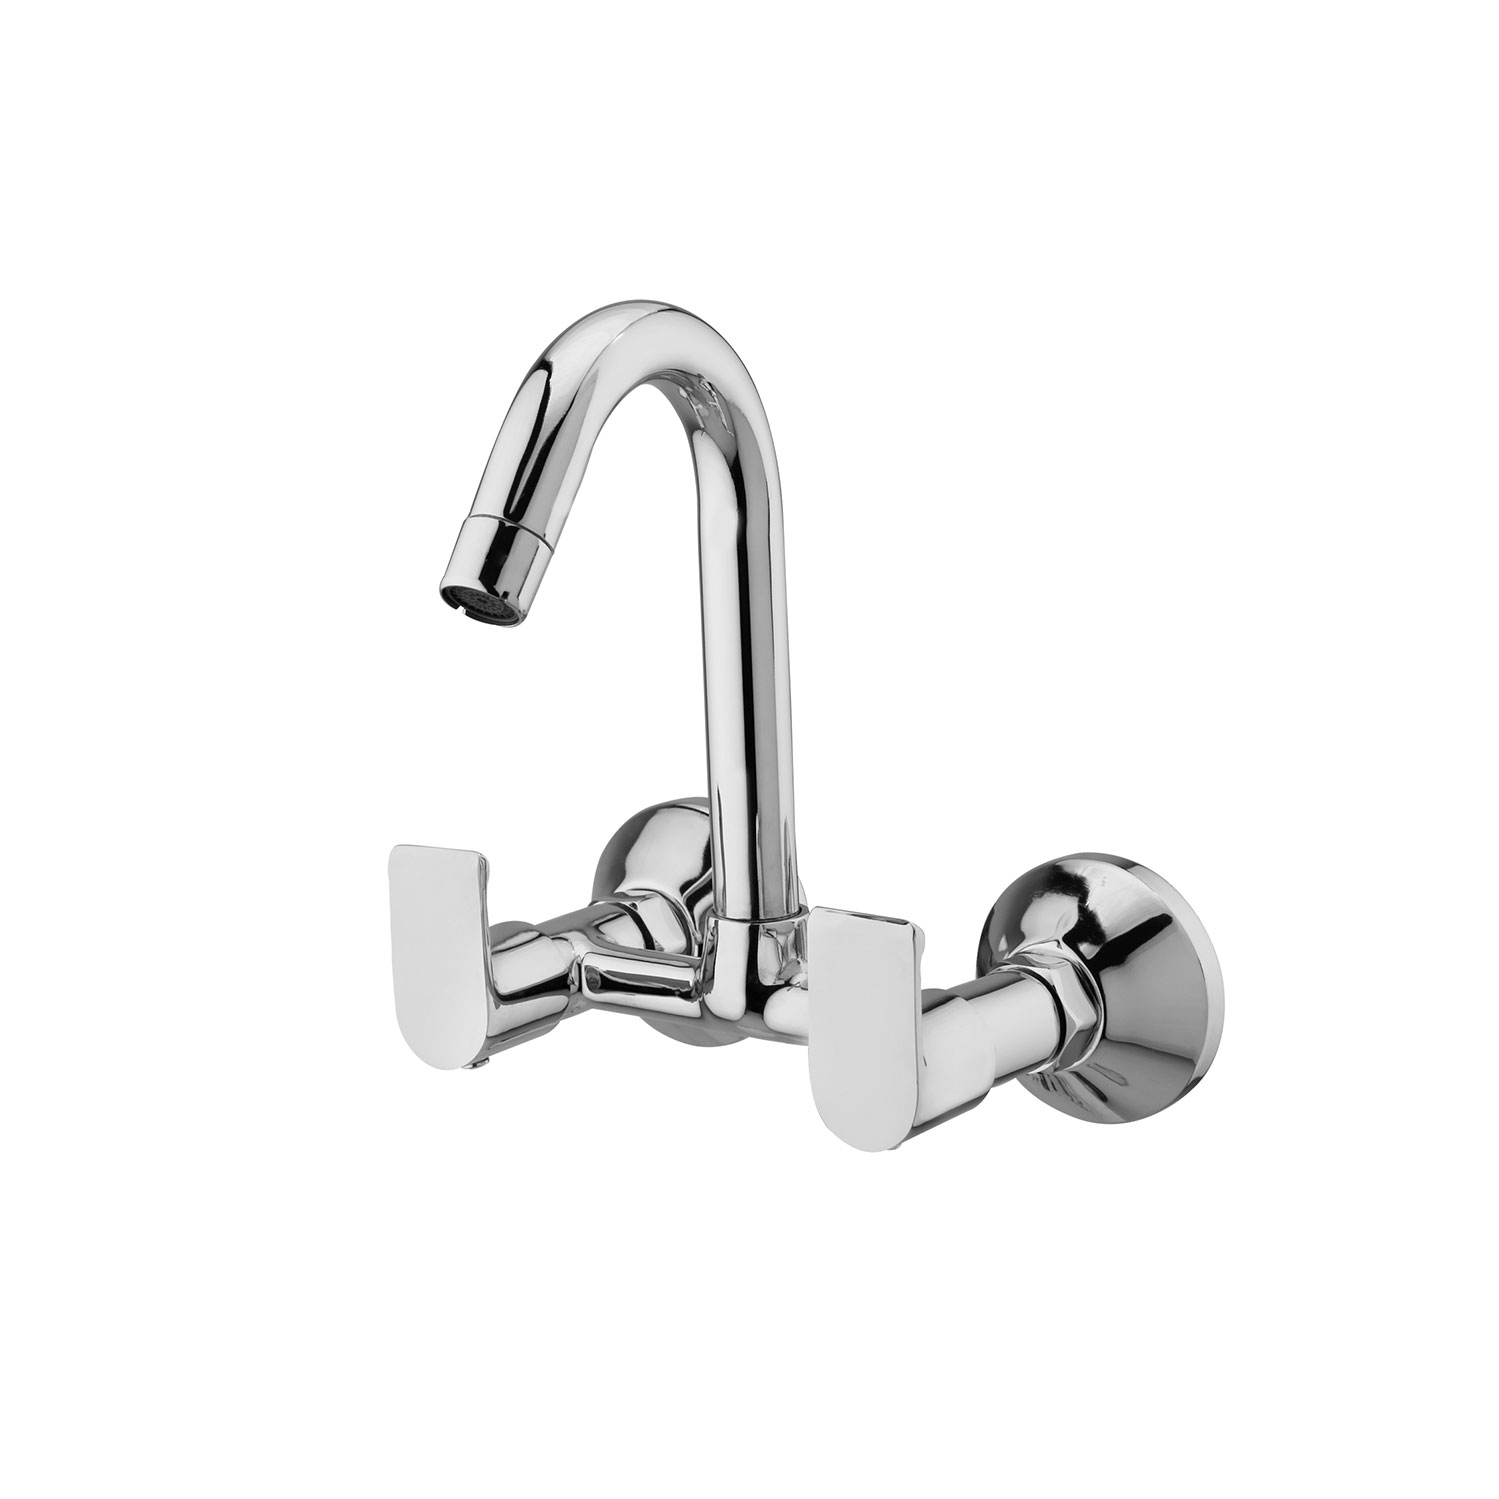 Passion Sink Mixer with Swivel Spout